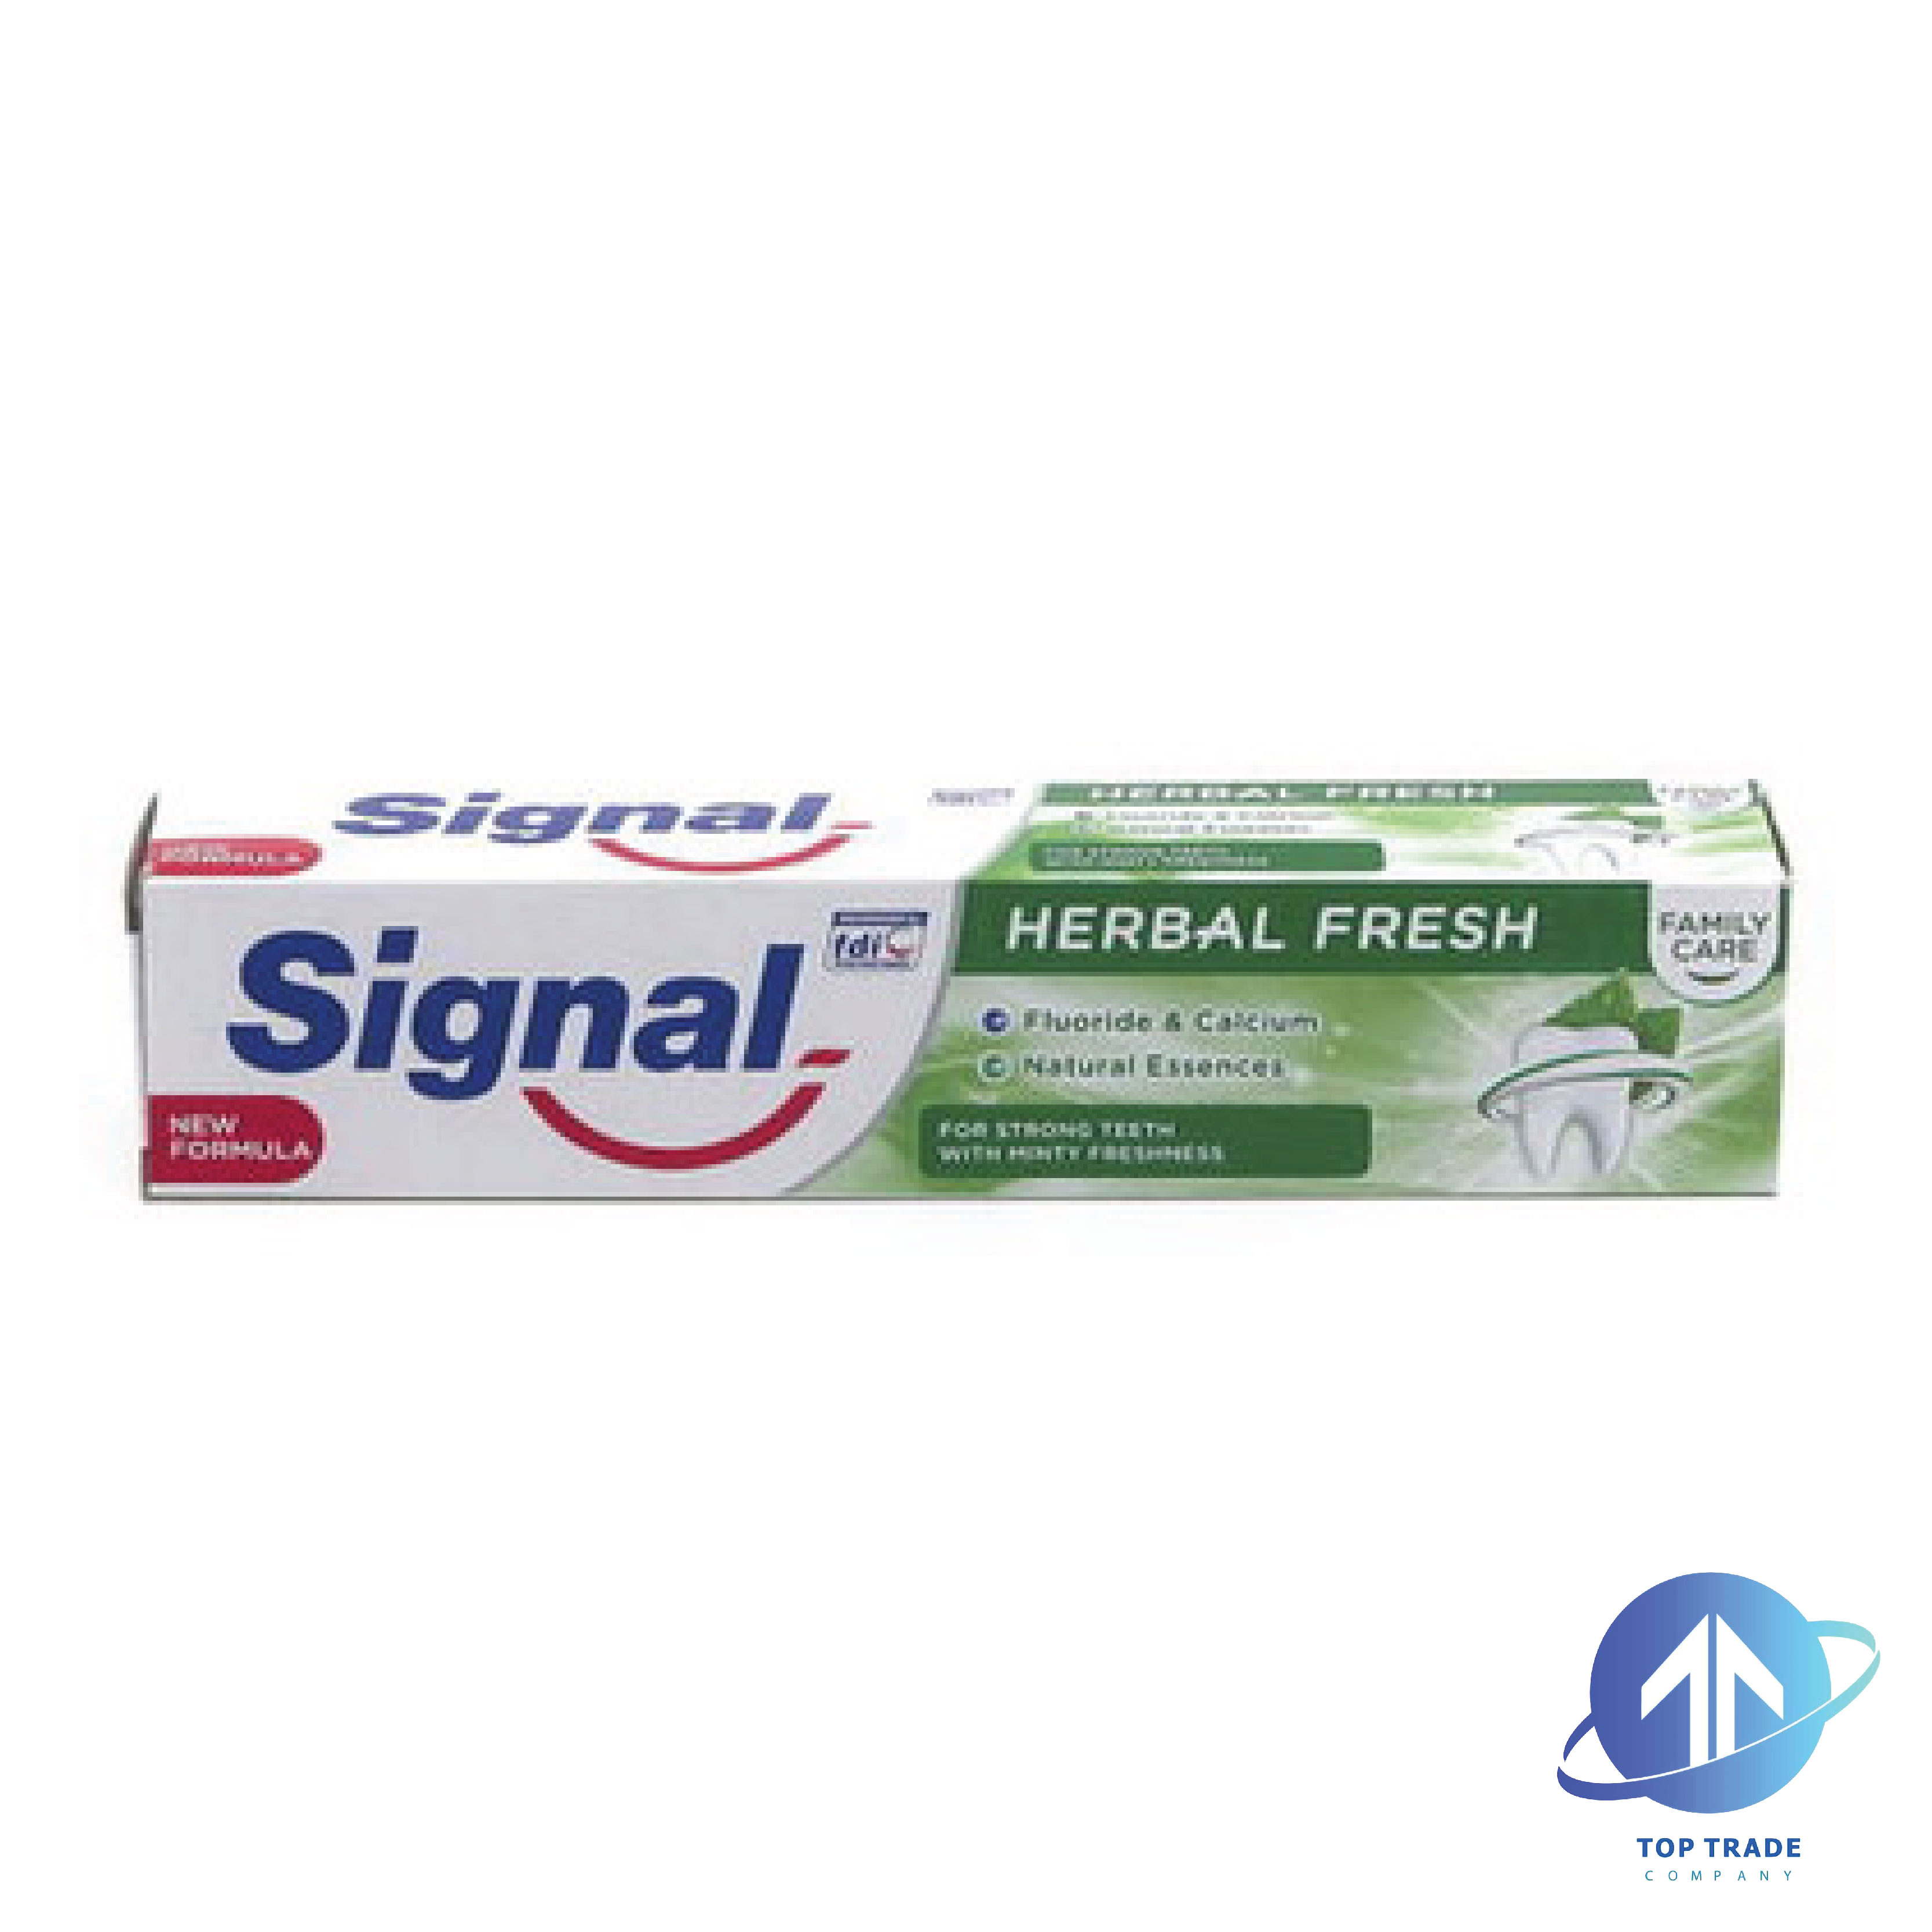 Signal toothpaste family care herbal fresh labelled 75ml